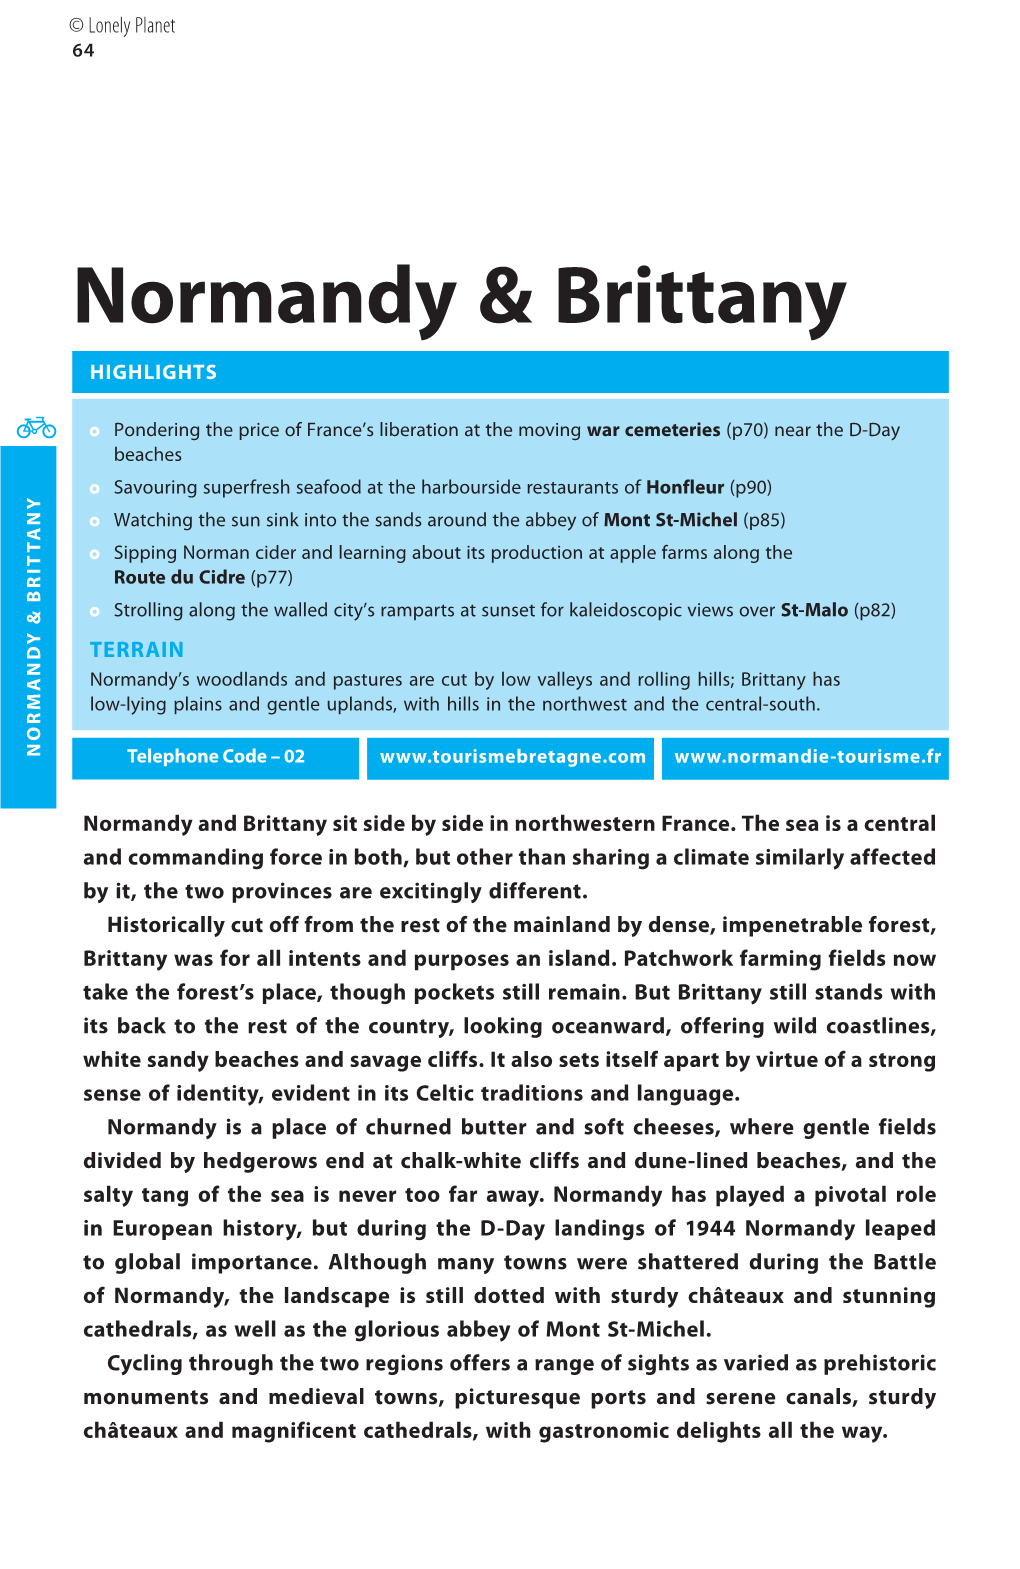 Normandy & Brittany